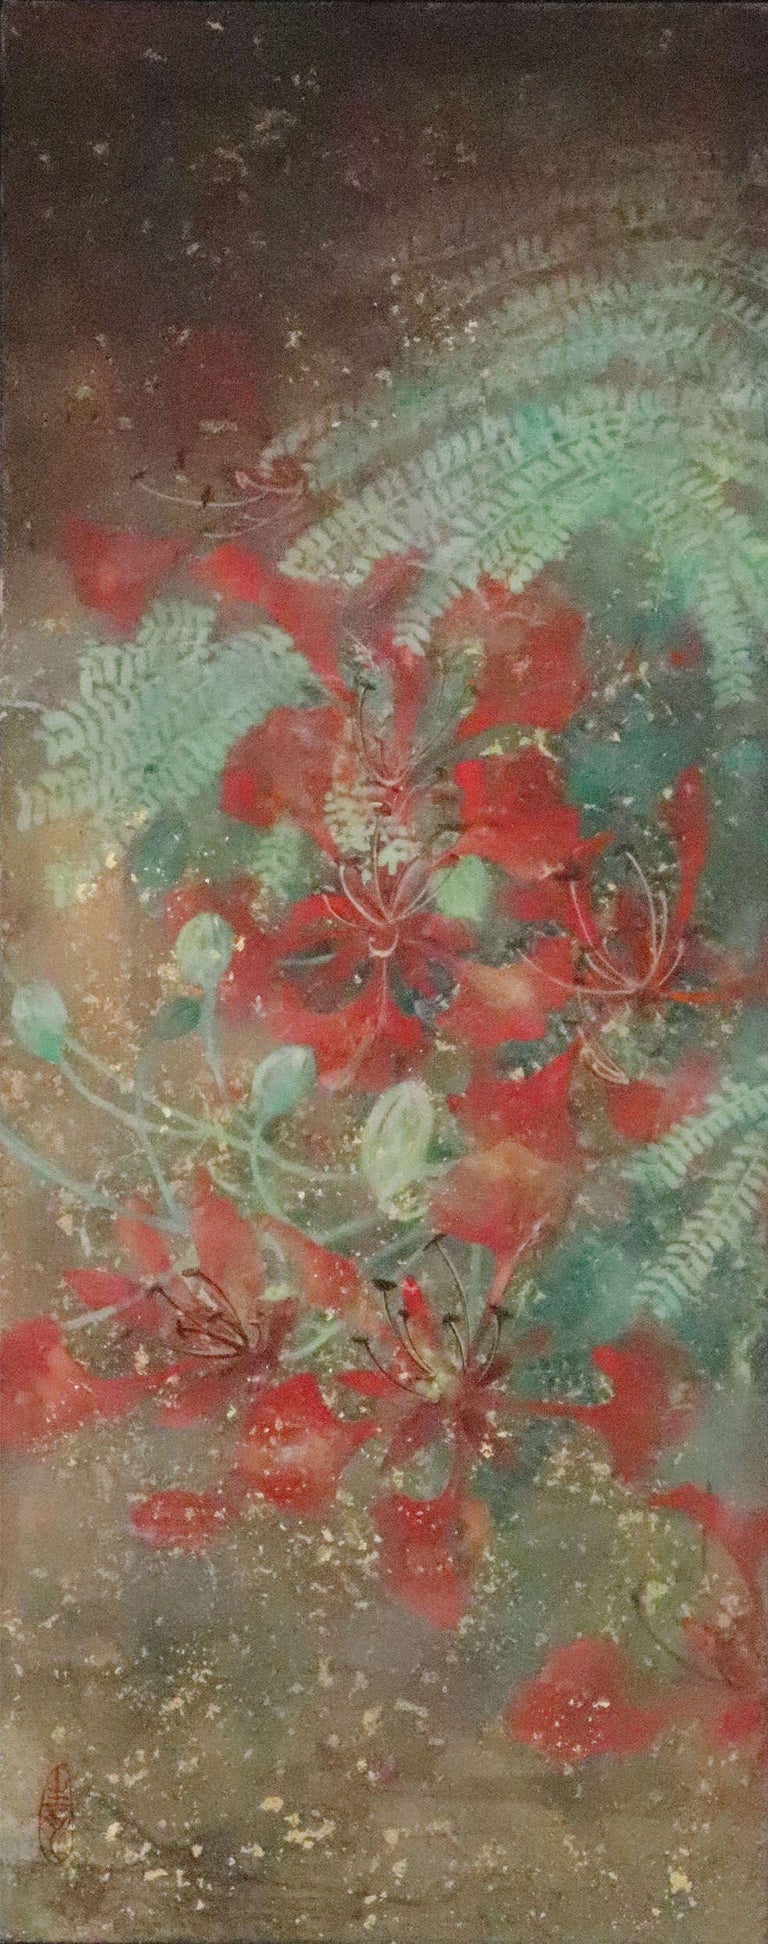 Yiching Chen Landscape Painting - Summer II by CHEN Yiching - Nihonga painting, vertical, flora, green and red